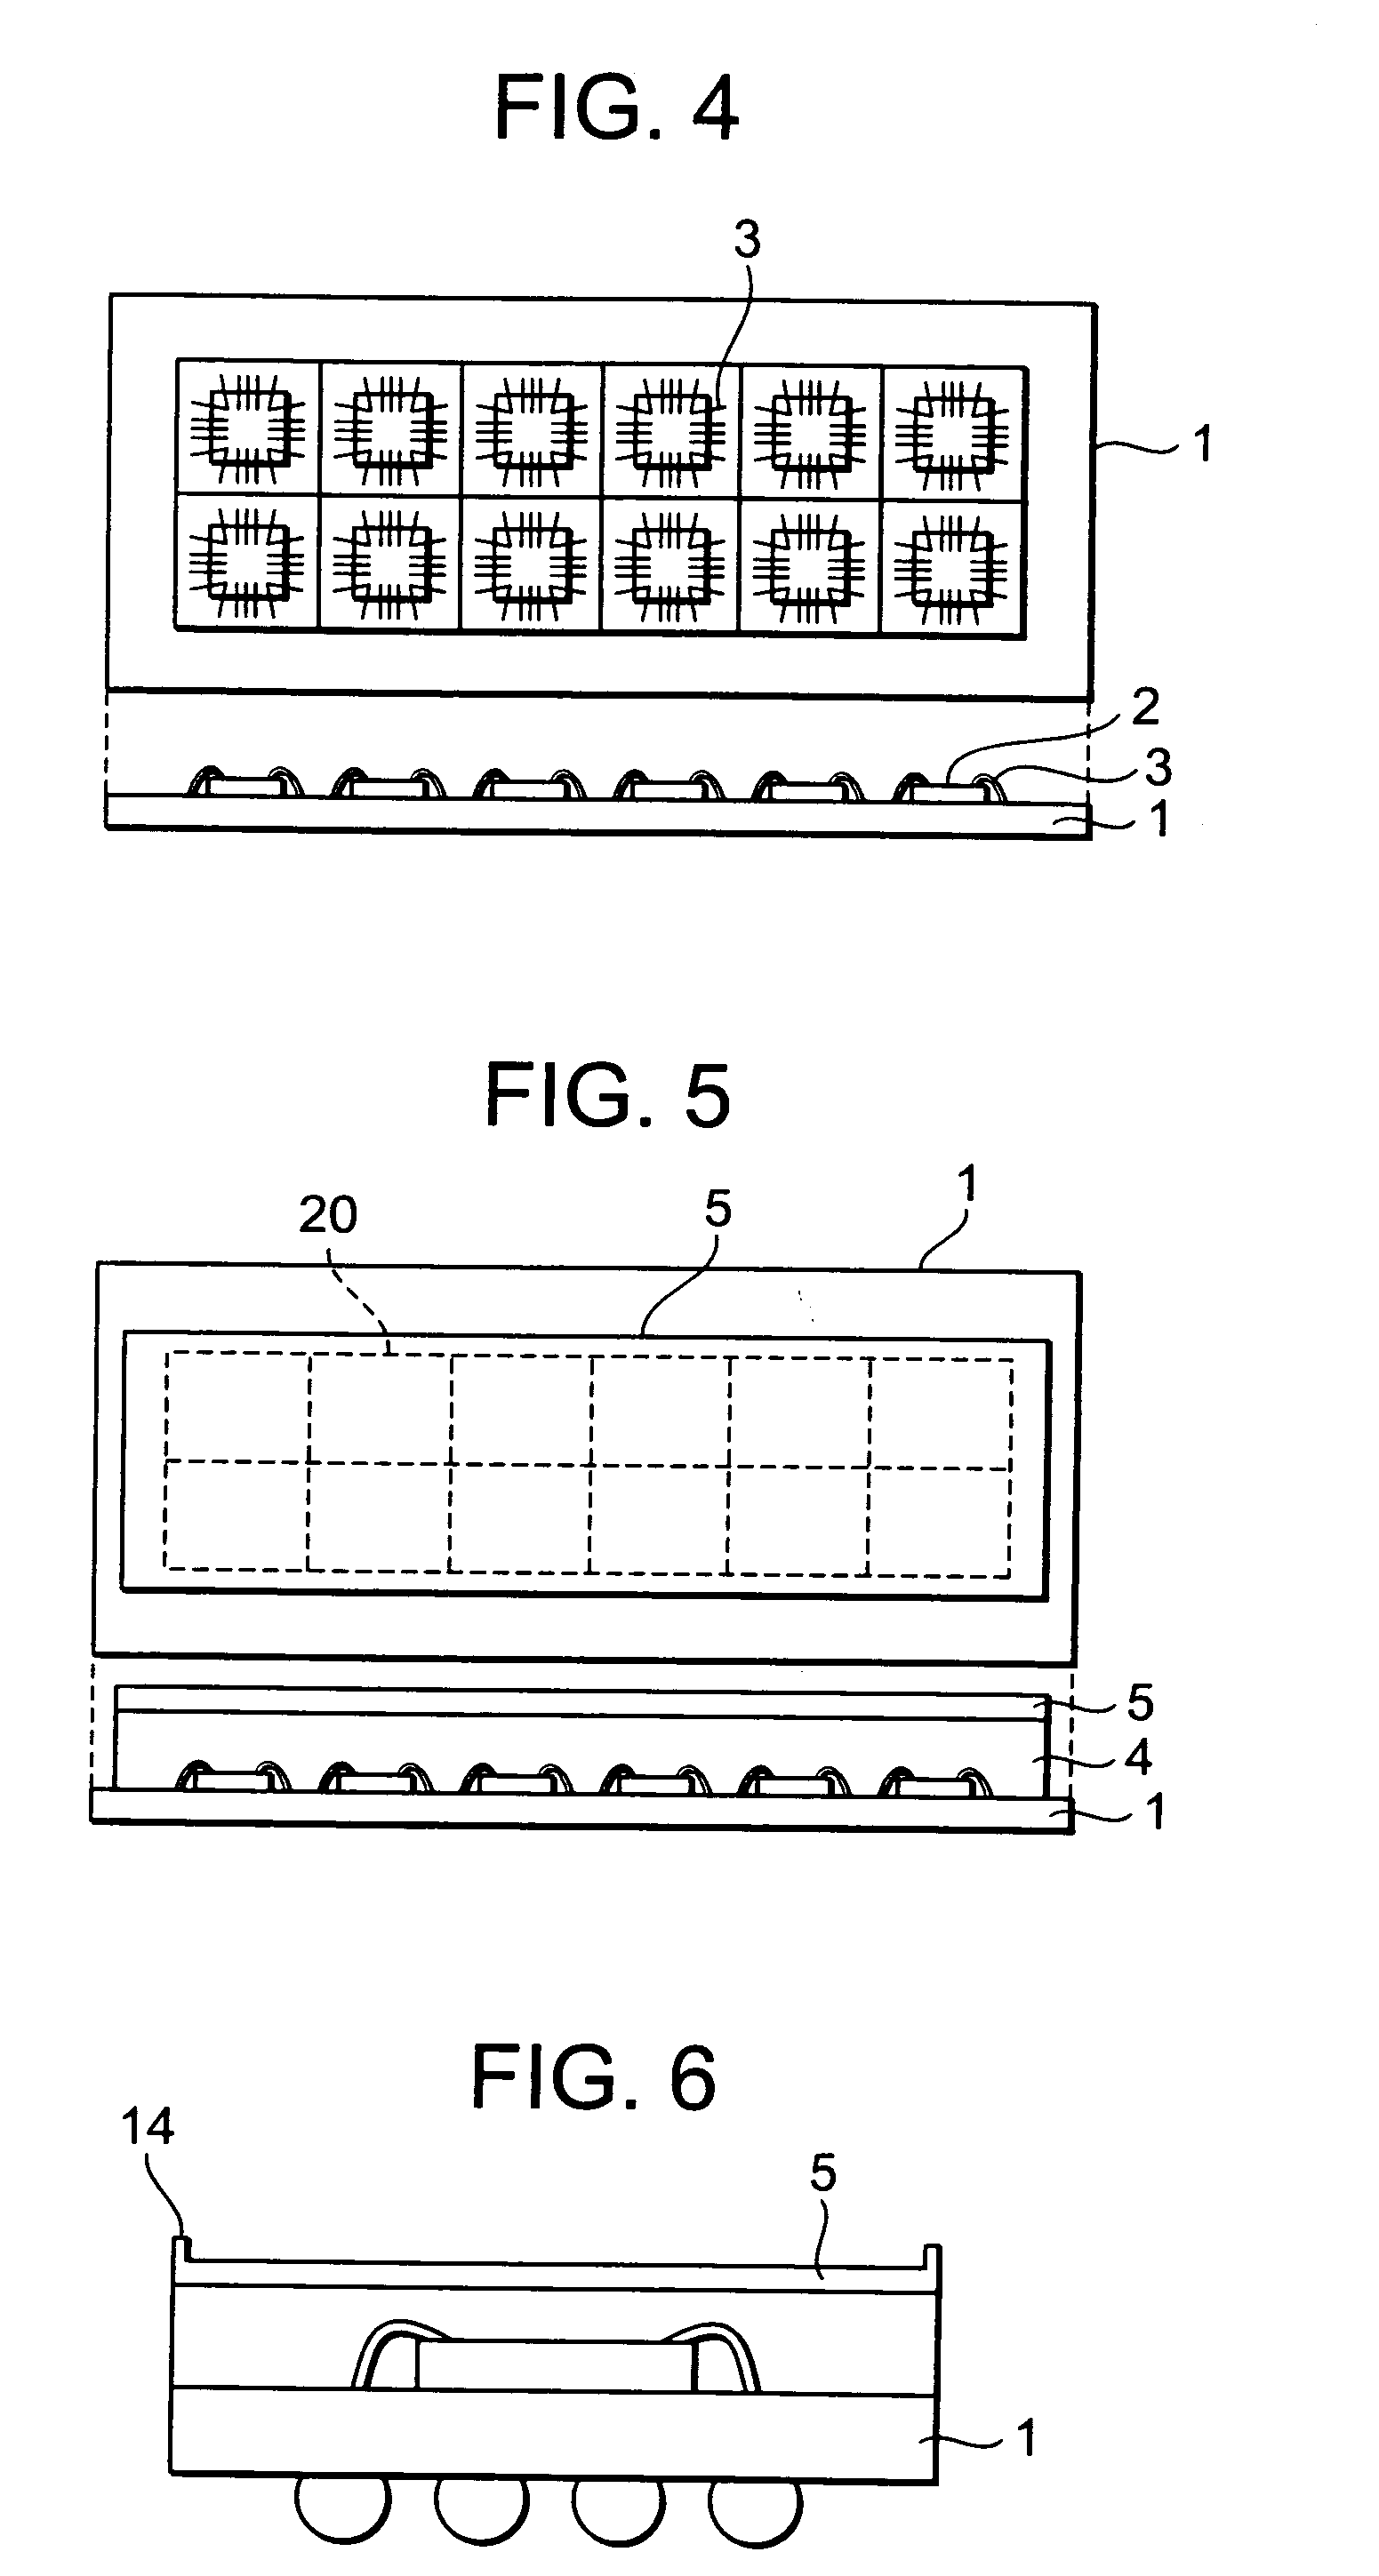 Method for manufacturing a semiconductor device having a heat spreader